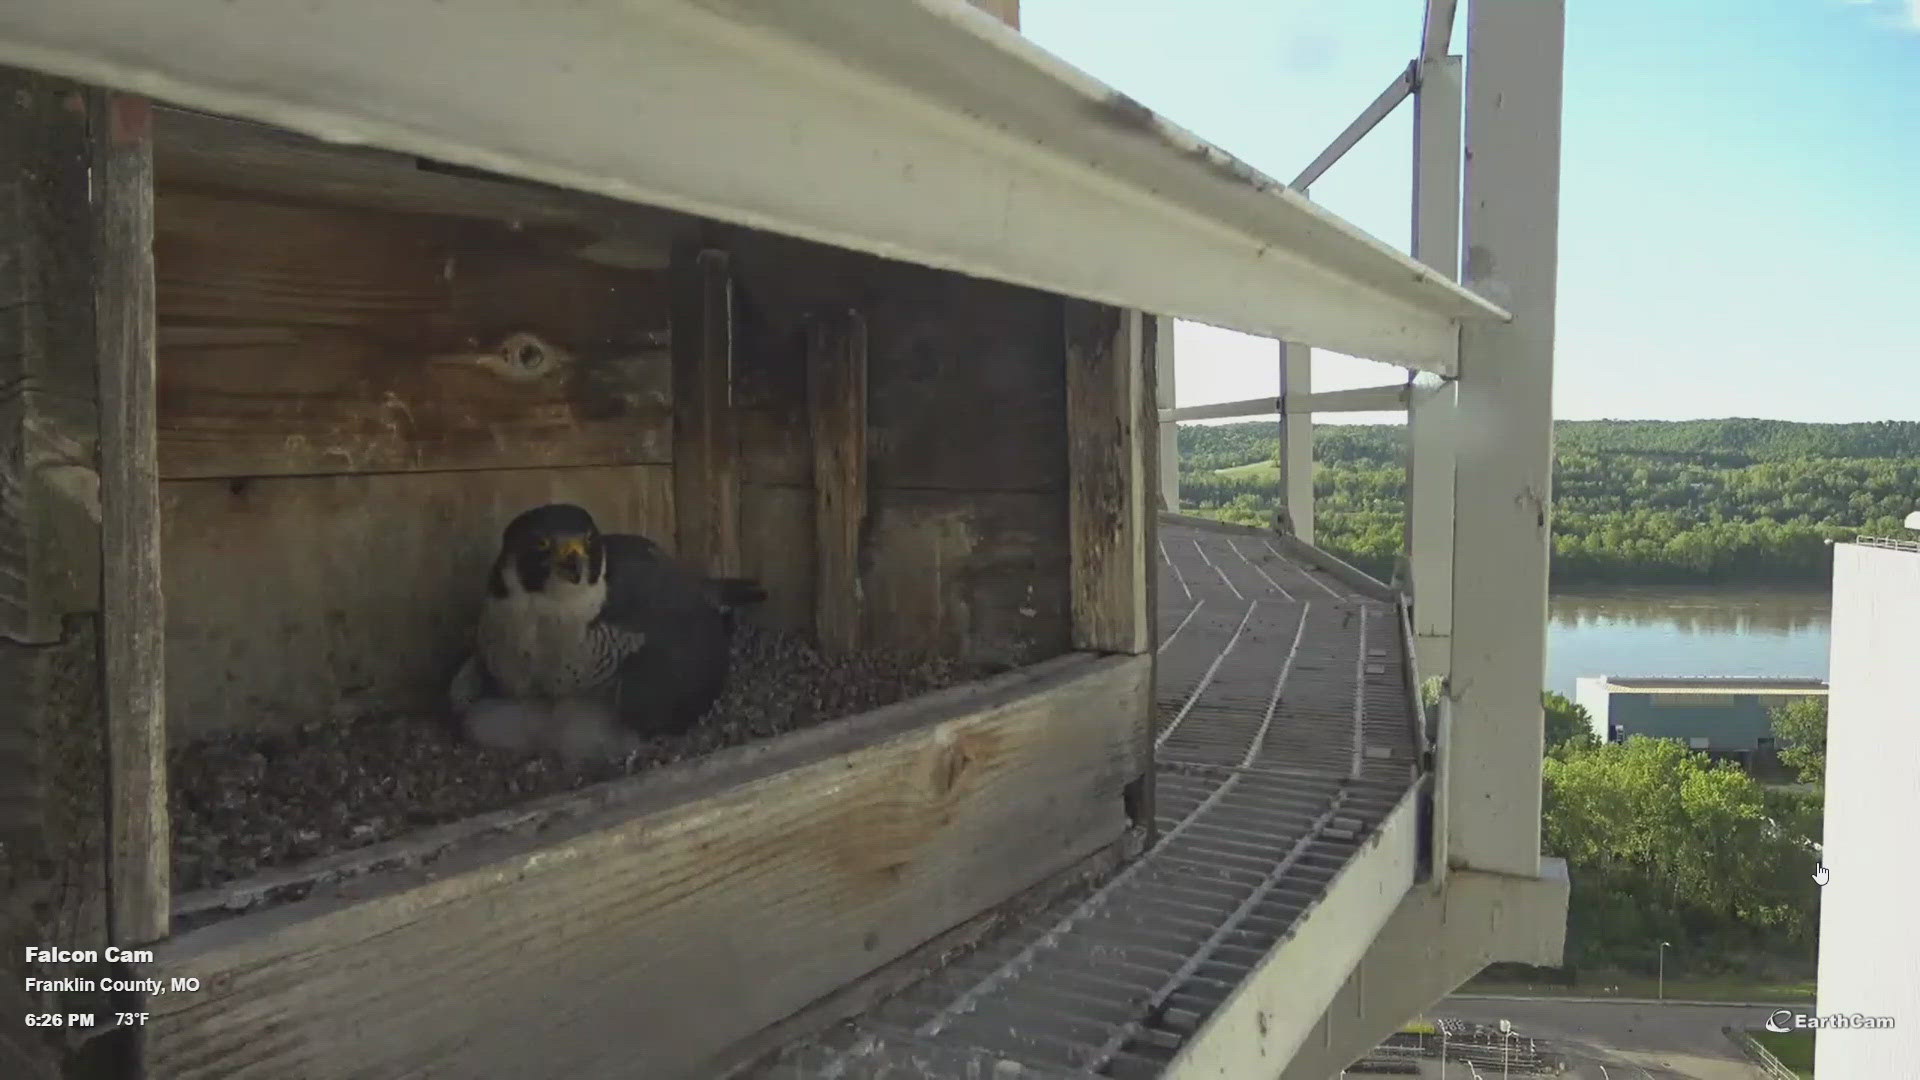 A pair of Peregrine falcons are caring for their newly hatched chicks, and all of it is being documented live thanks to an Ameren Missouri camera.